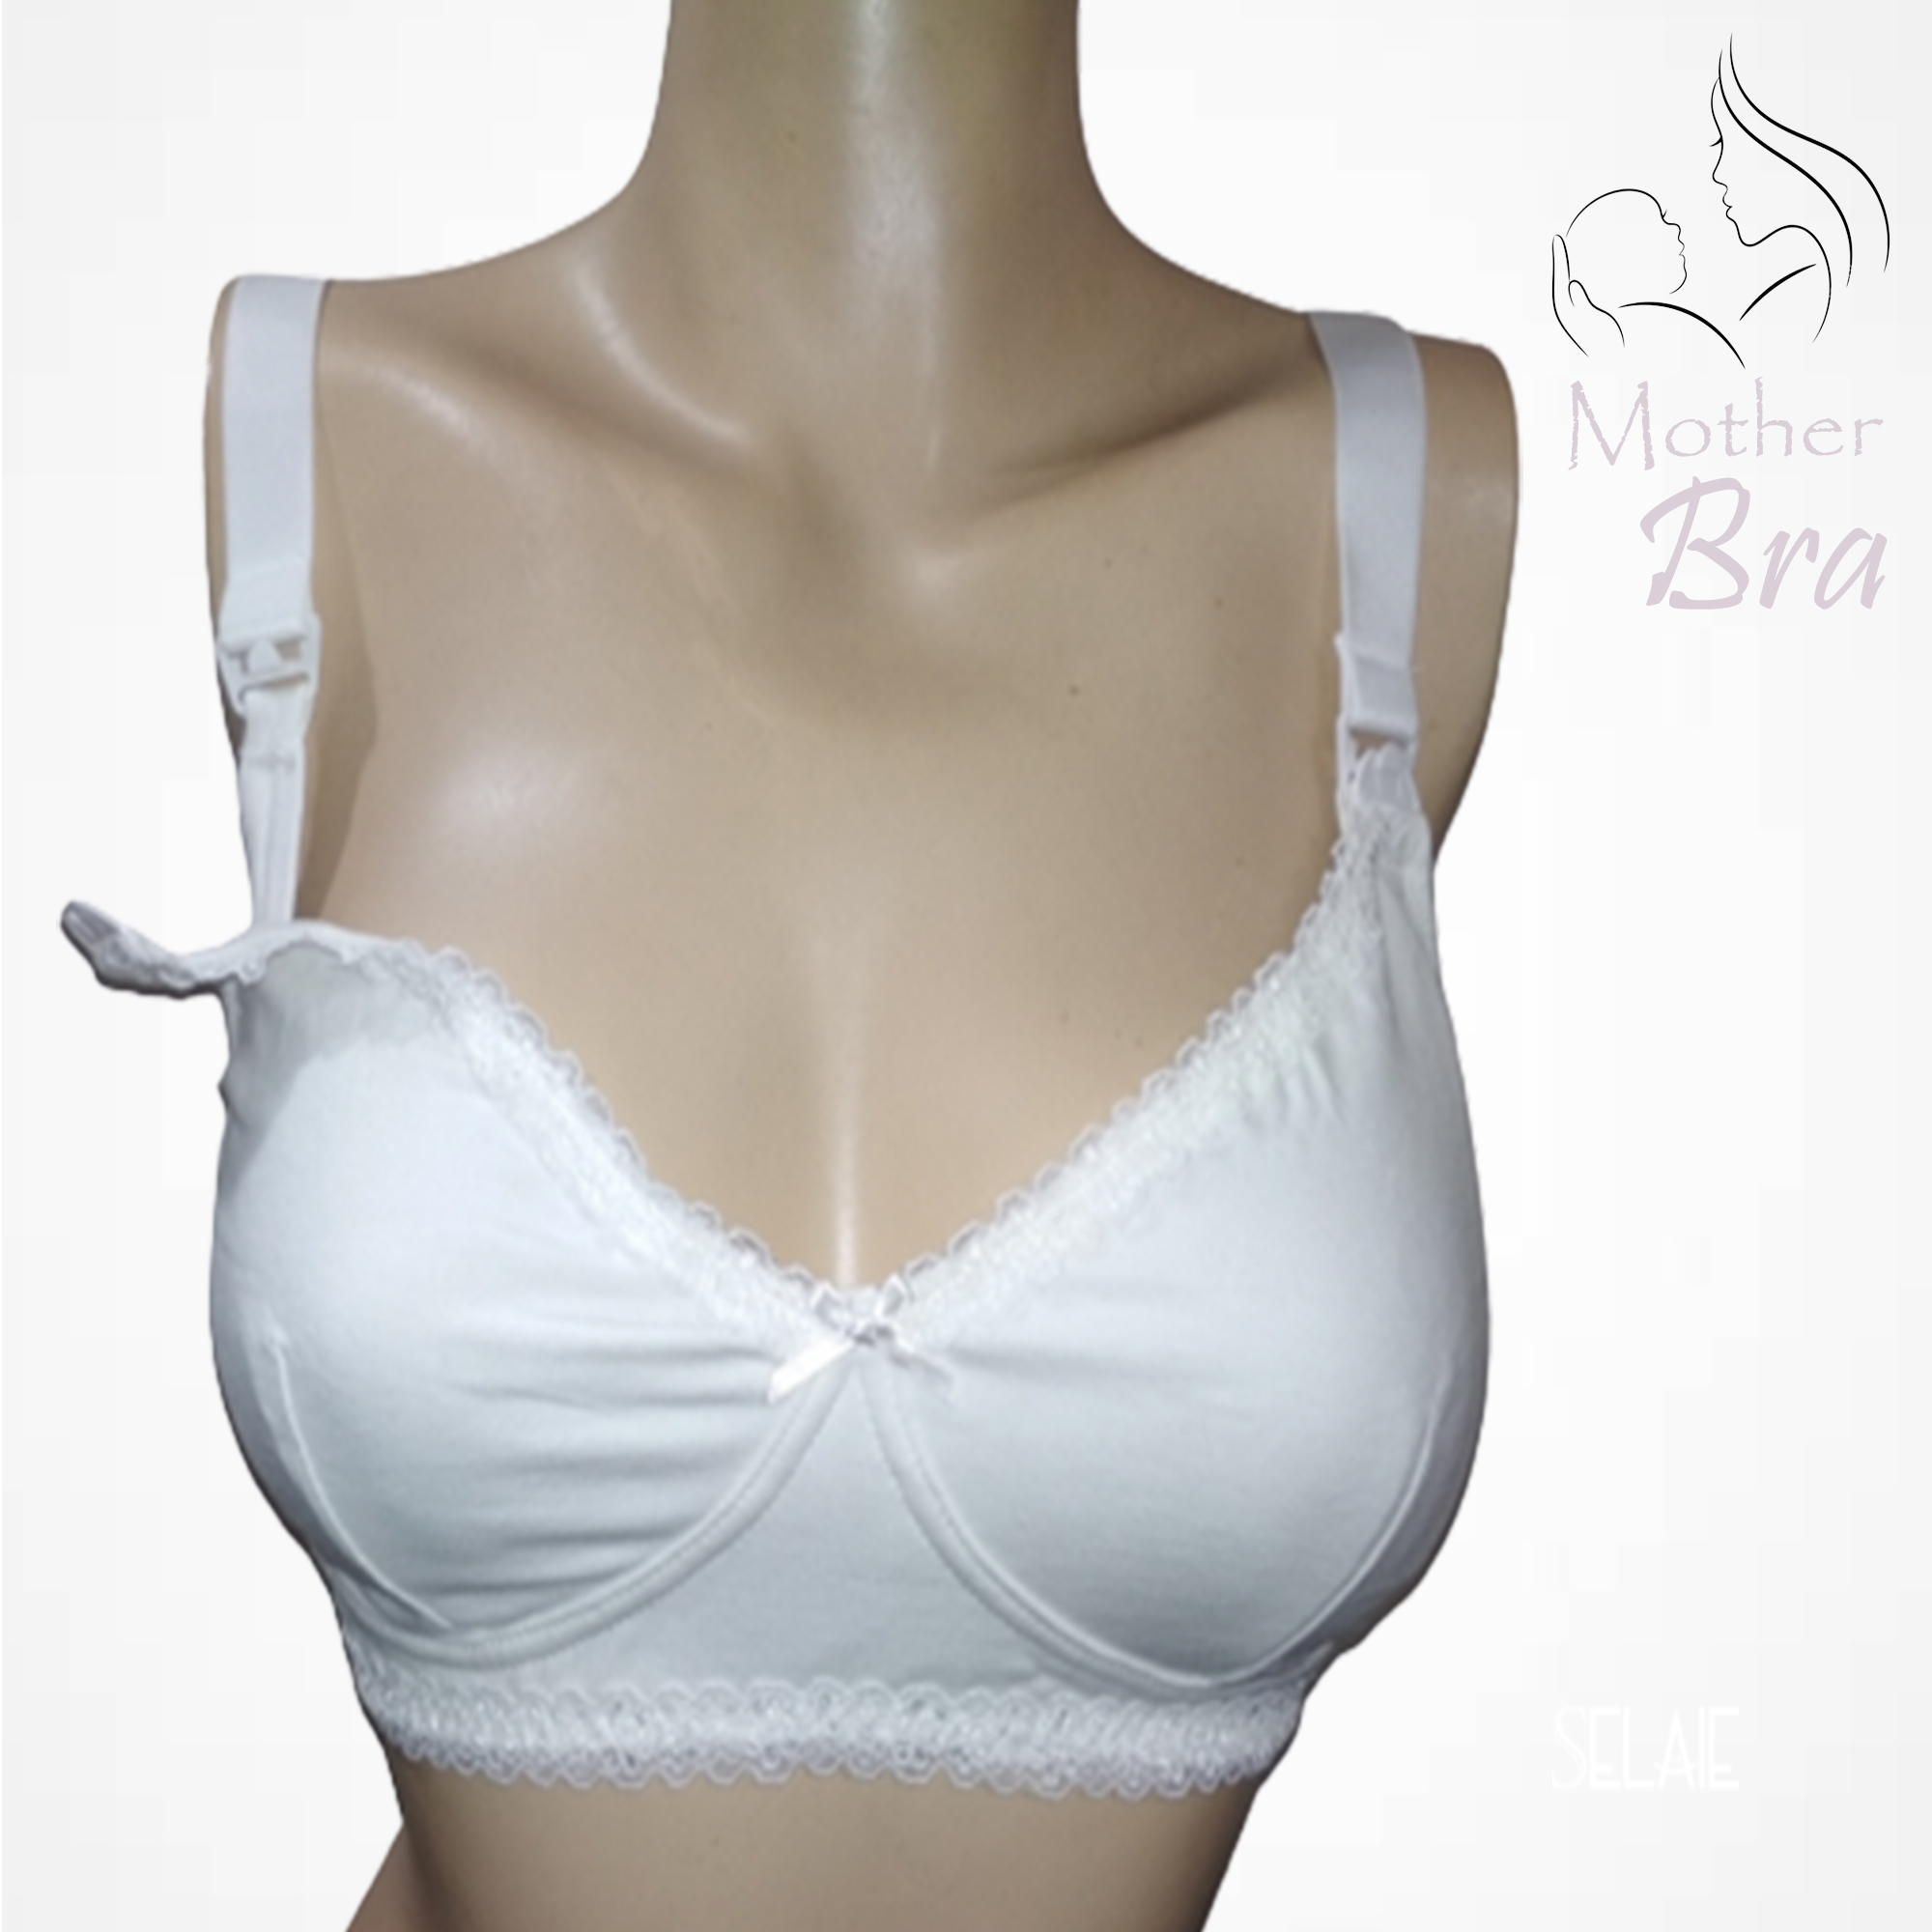 Mother care bra cotton baby care breast feeding Maternity intimate